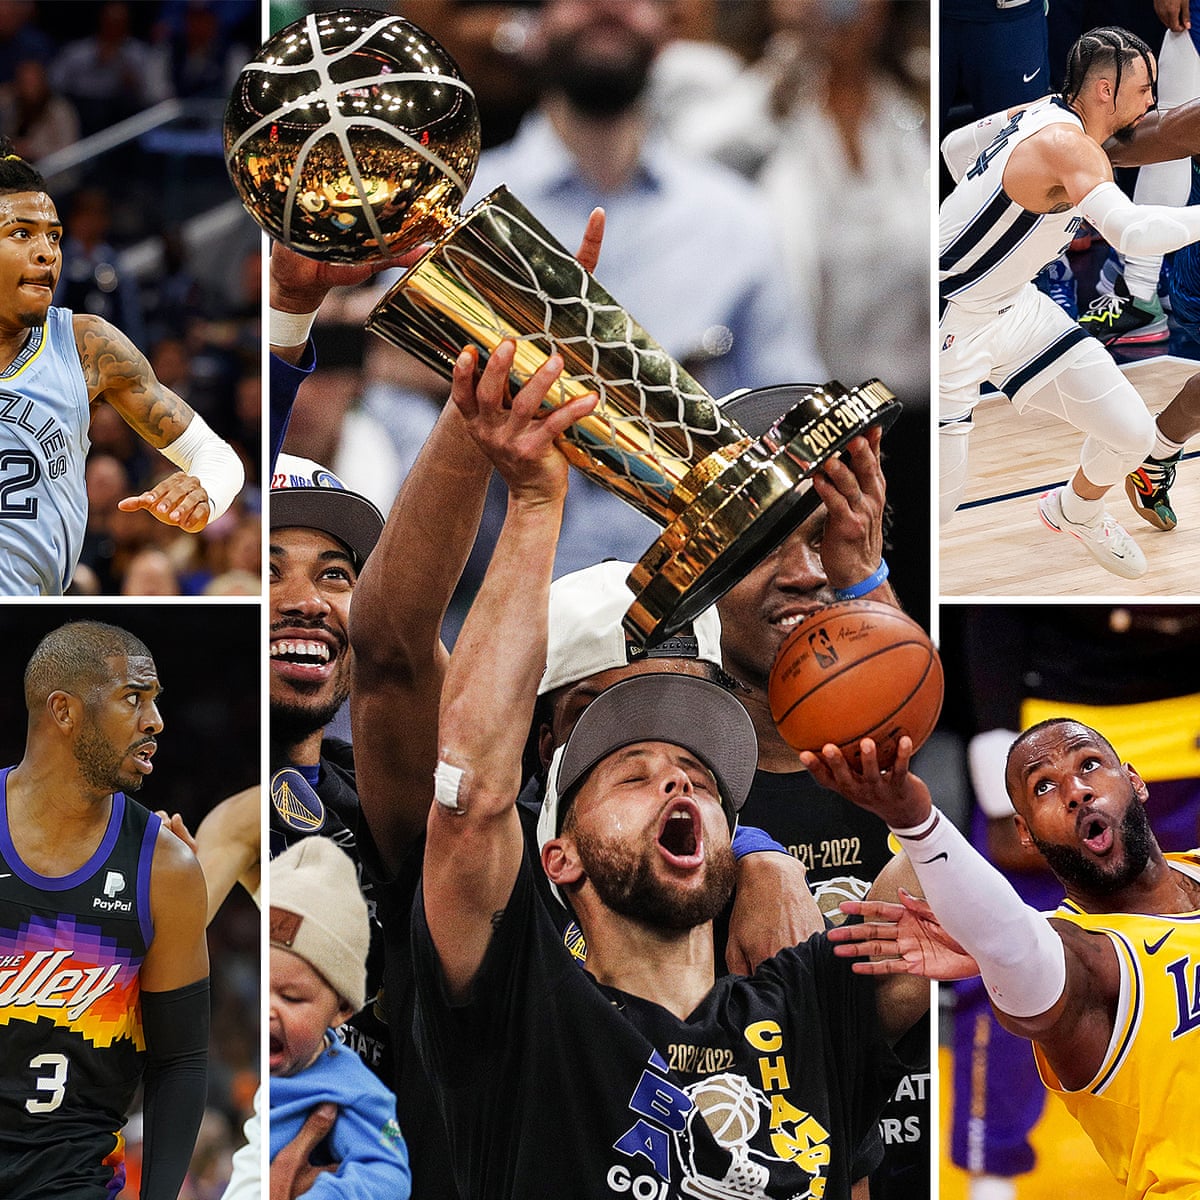 There's still no Finals MVP trophy for Stephen Curry, only a growing legacy